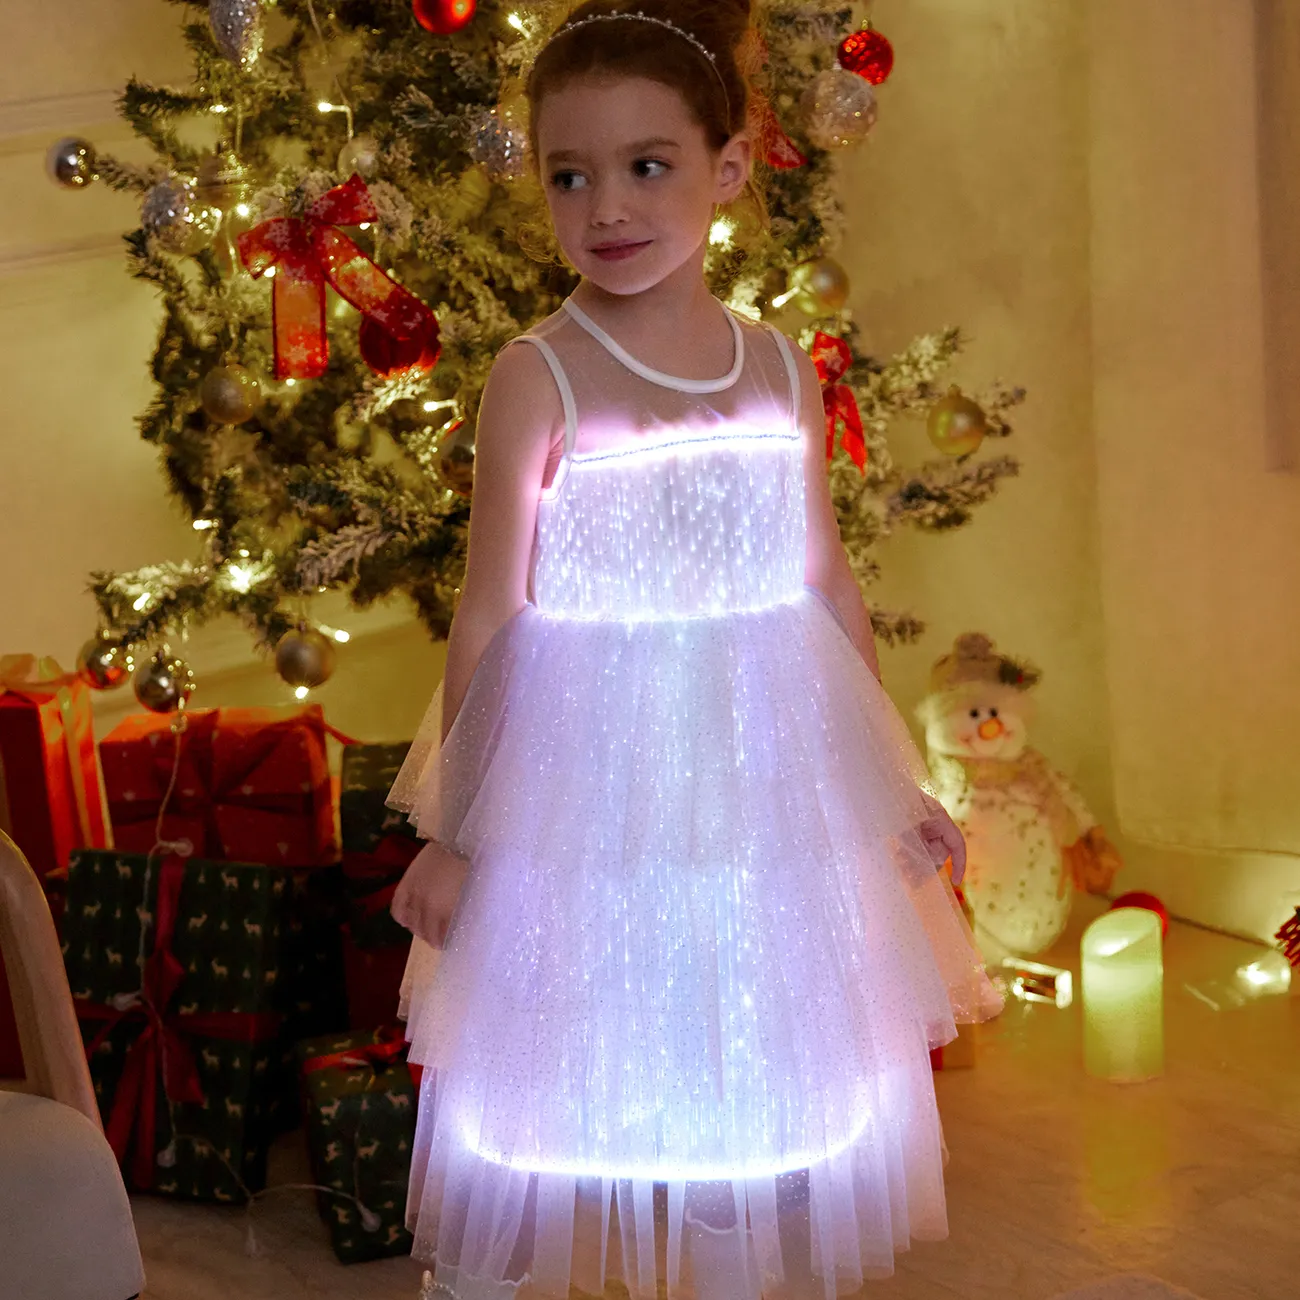 Go-Glow Light Up White Party Dress With Sequined Butterfly Including Controller (Built-In Battery) White big image 1